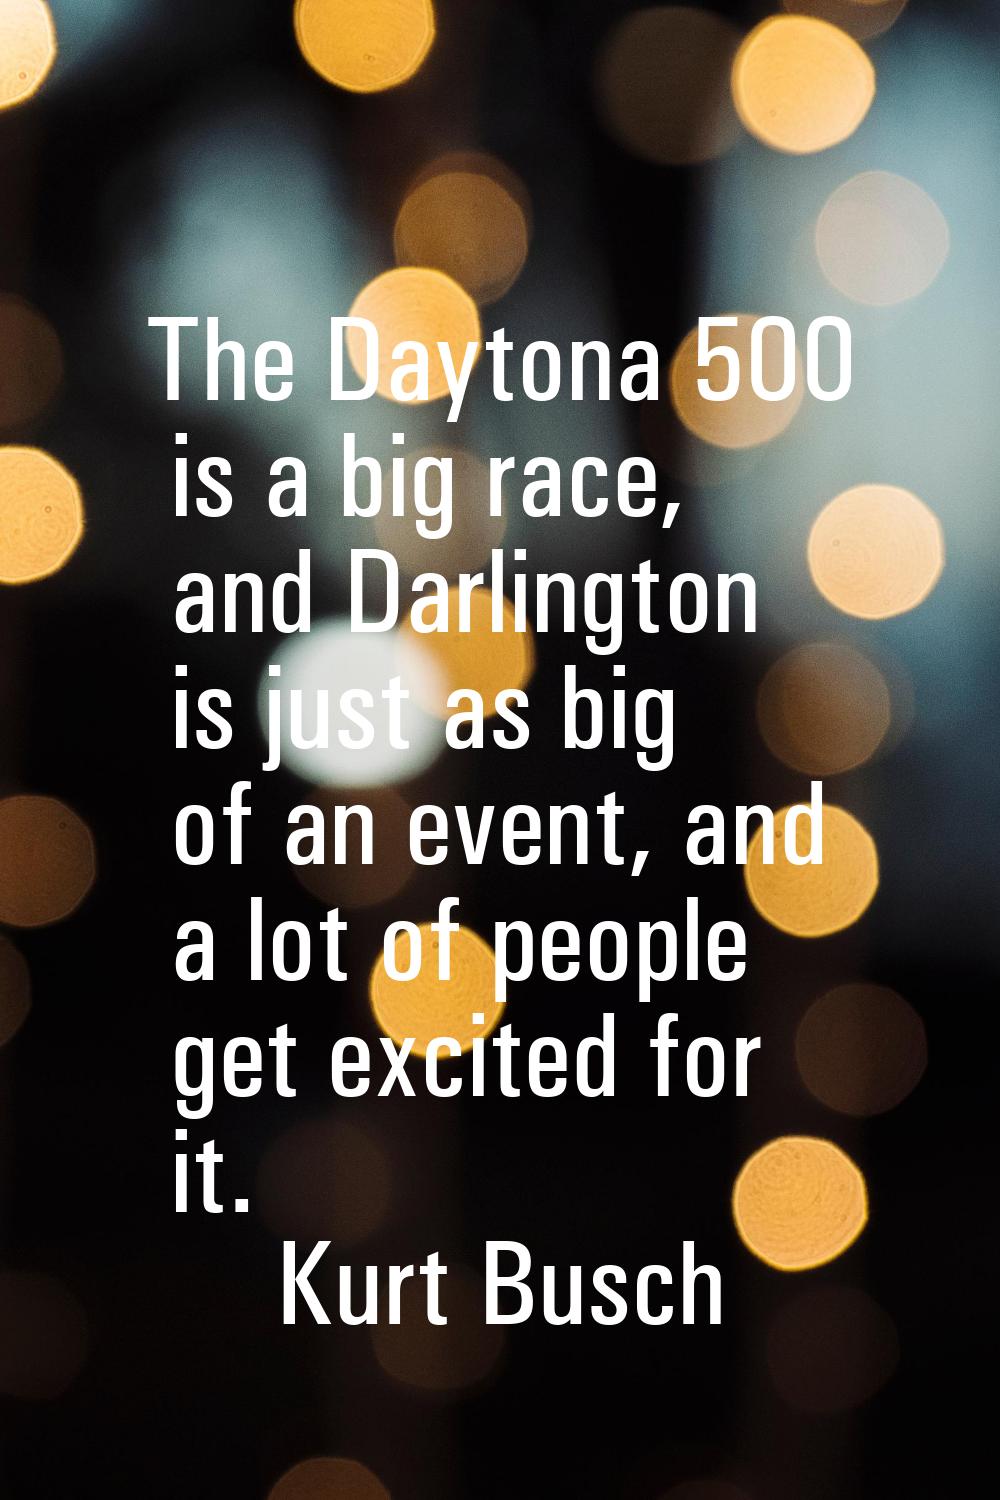 The Daytona 500 is a big race, and Darlington is just as big of an event, and a lot of people get e